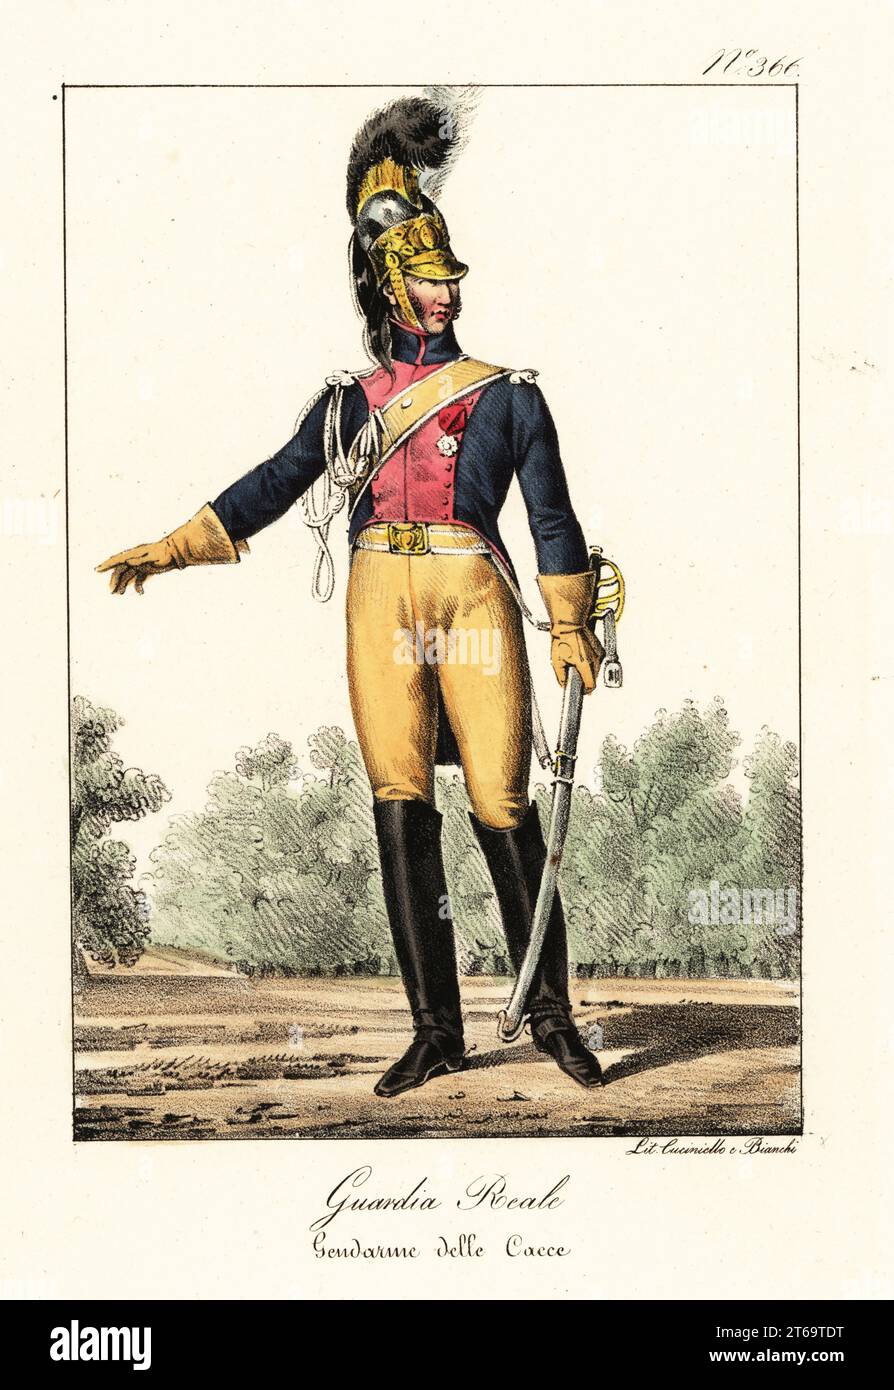 Uniform of a cavalry man of the Royal Guard, Gendarmerie de la Chasse. Guardsman in crested dragoon's helmet, blue coat, red lapels, buff breeches and gloves, boots and sabre. Bourbon Restoration, 1814. Garde Royale, Gendarme des Chasses. Handcoloured lithograph by Lorenzo Bianchi and Domenico Cuciniello after Hippolyte Lecomte from Costumi civili e militari della monarchia francese dal 1200 al 1820, Naples, 1825. Italian edition of Lecomtes Civilian and military costumes of the French monarchy from 1200 to 1820. Stock Photo